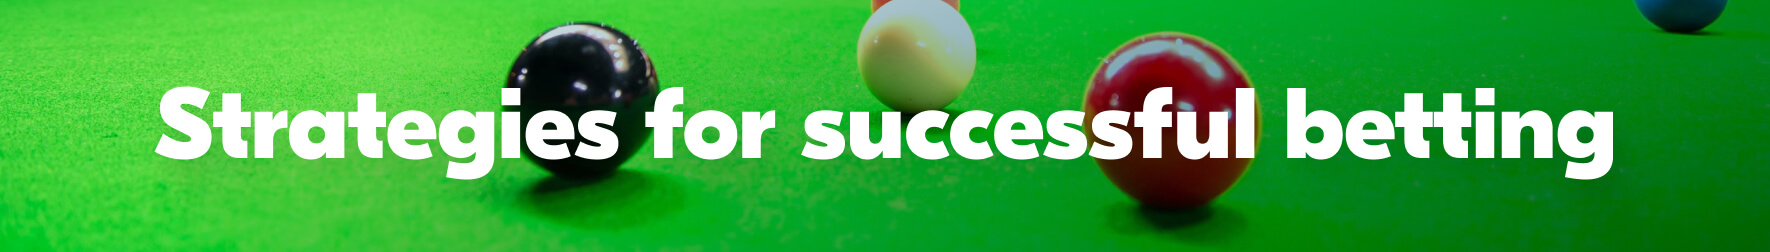 Working strategies for successful snooker betting